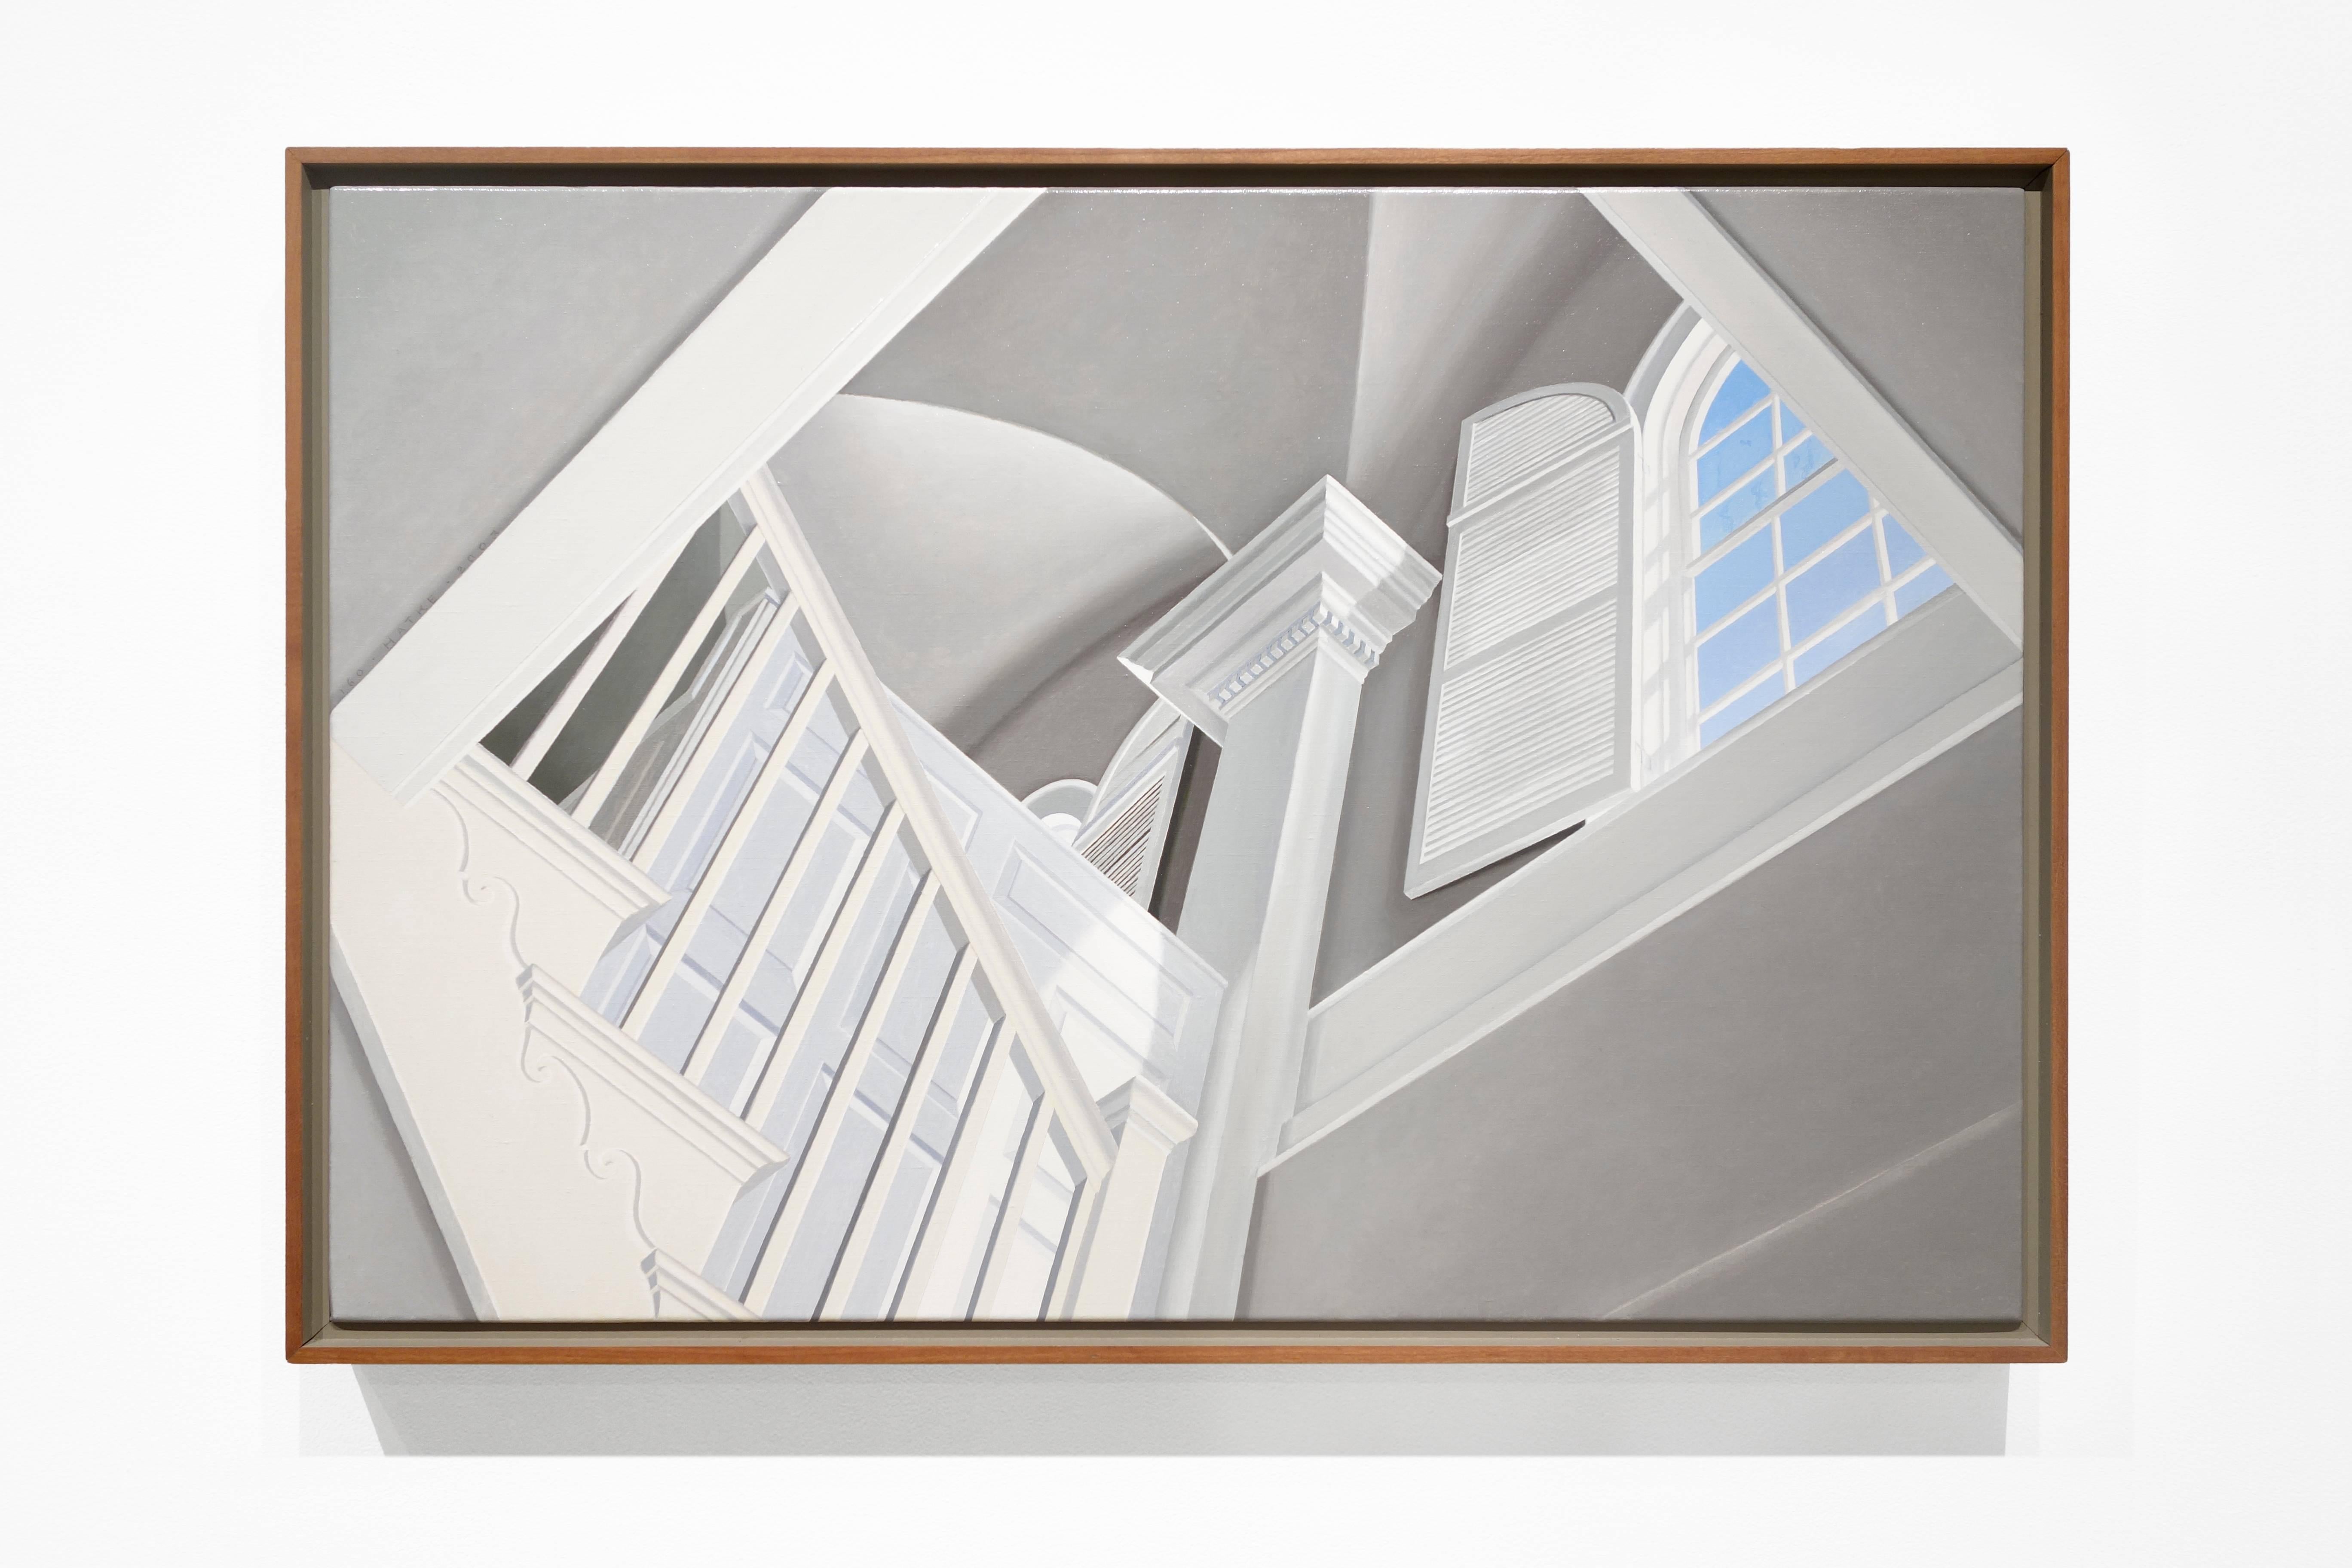 STEPS, photo-realistic, white ceiling, blue sky out of window, inside house - Painting by Walter Hatke